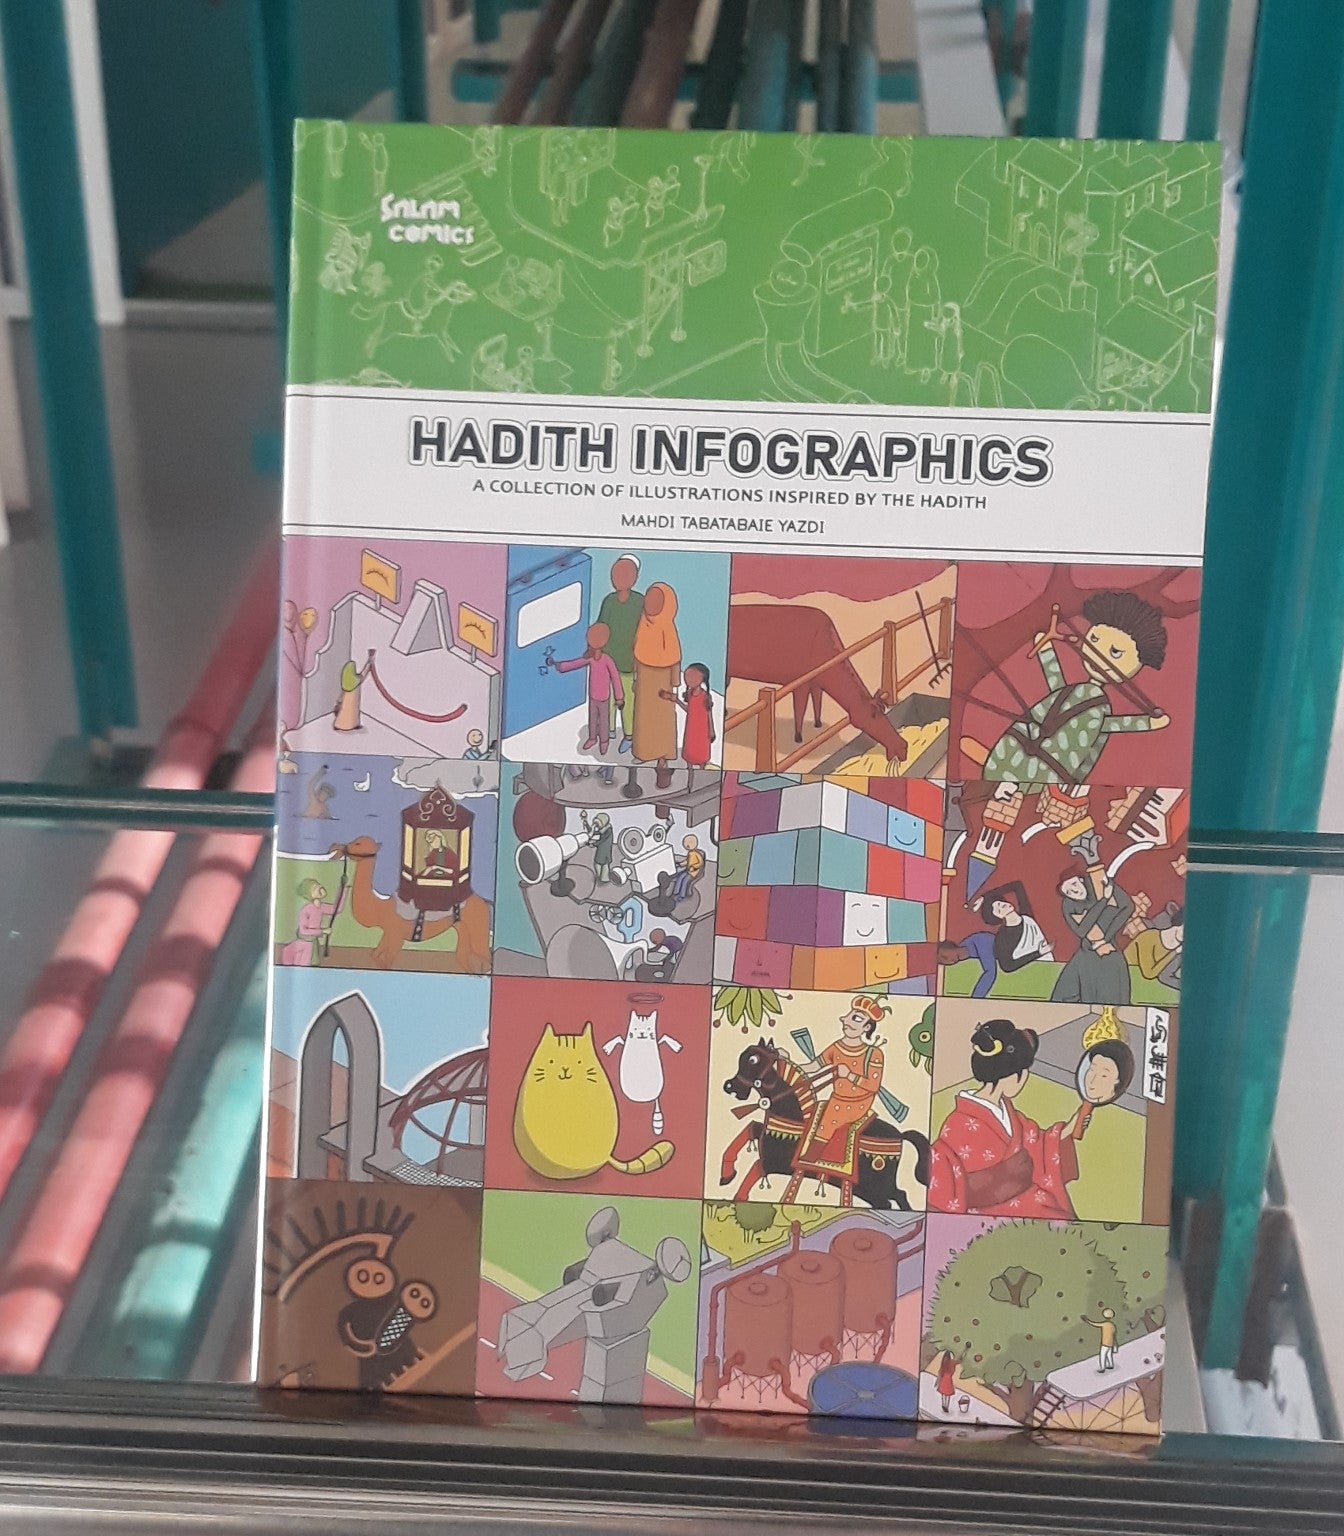 Hadith Infographics: A Collection of Illustrations Inspired by the Hadith